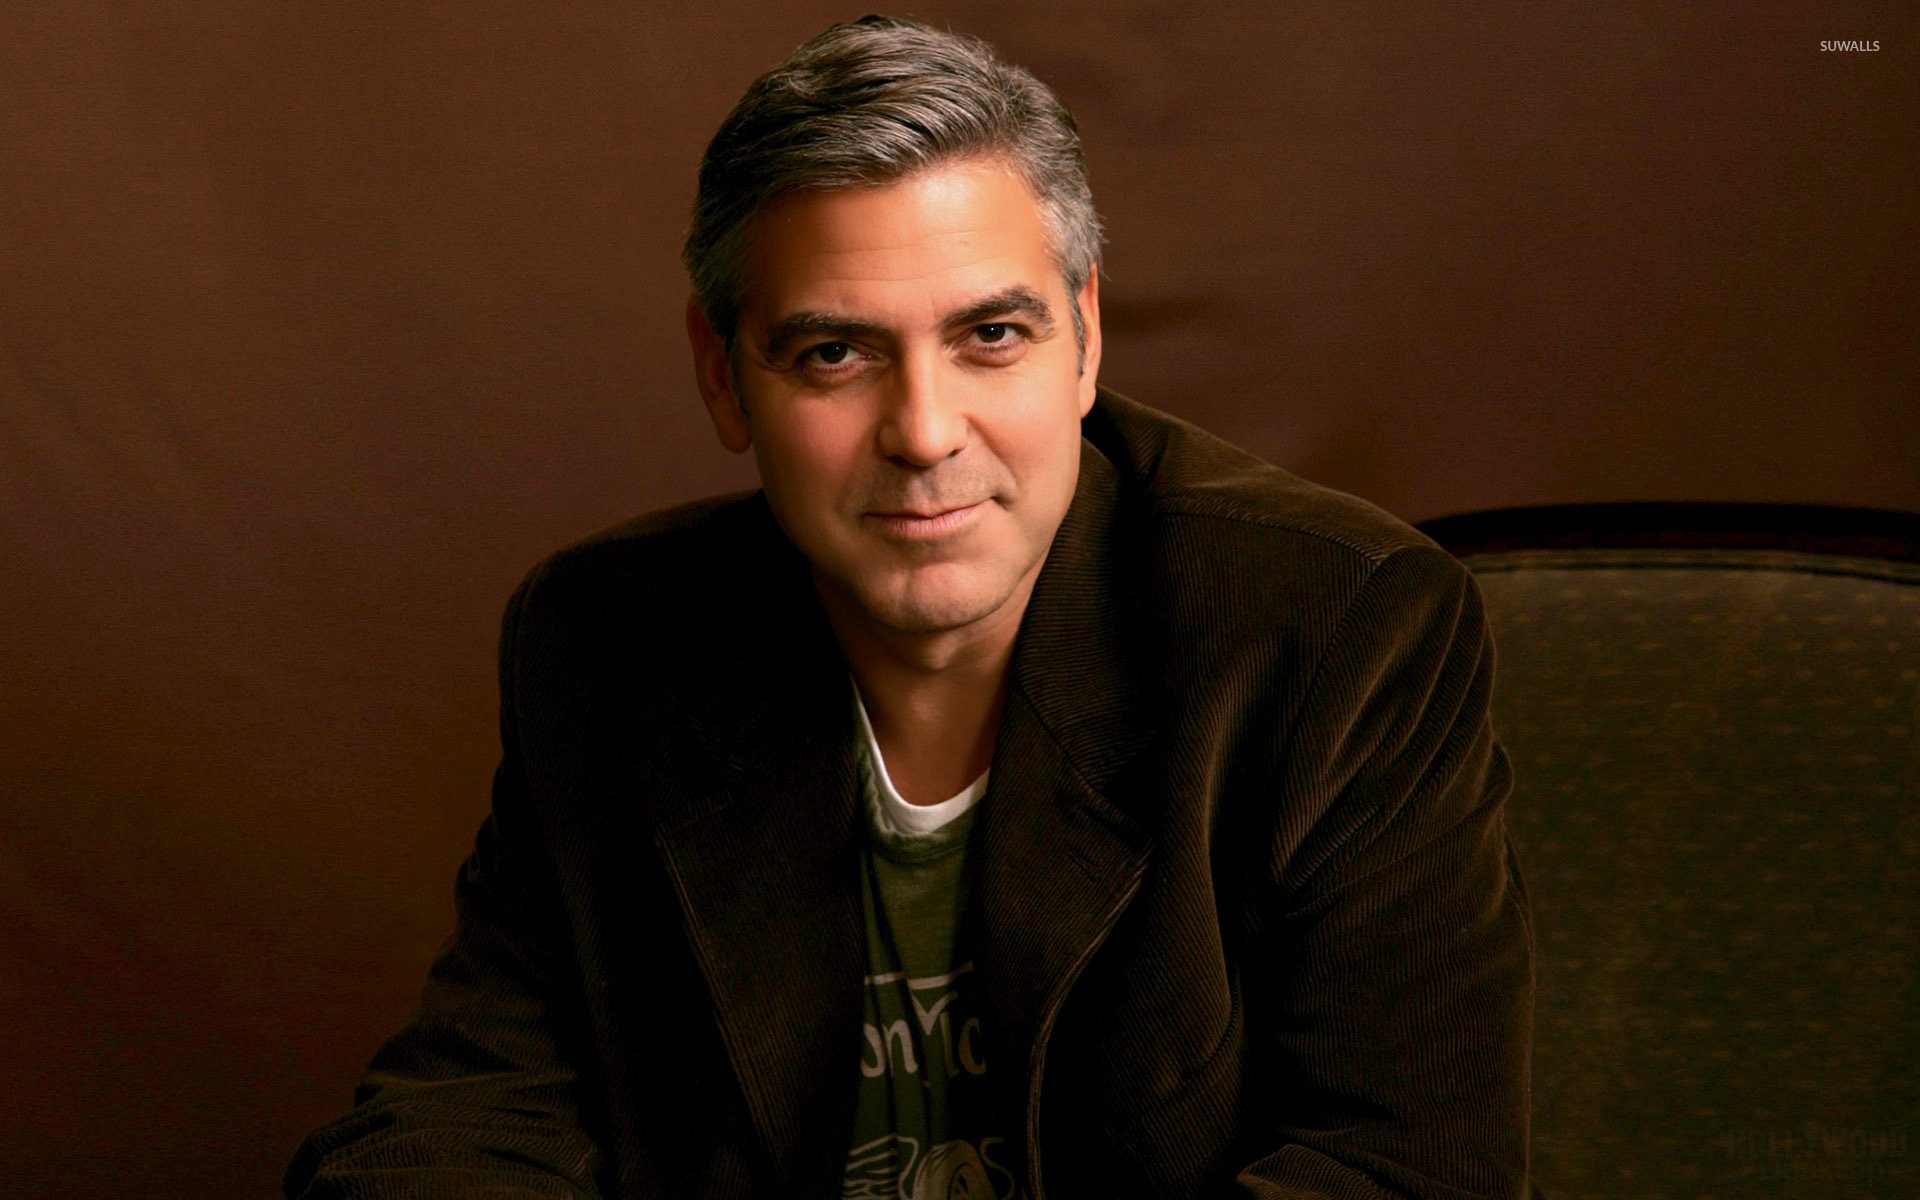 George Clooney Wallpaper Male Celebrity